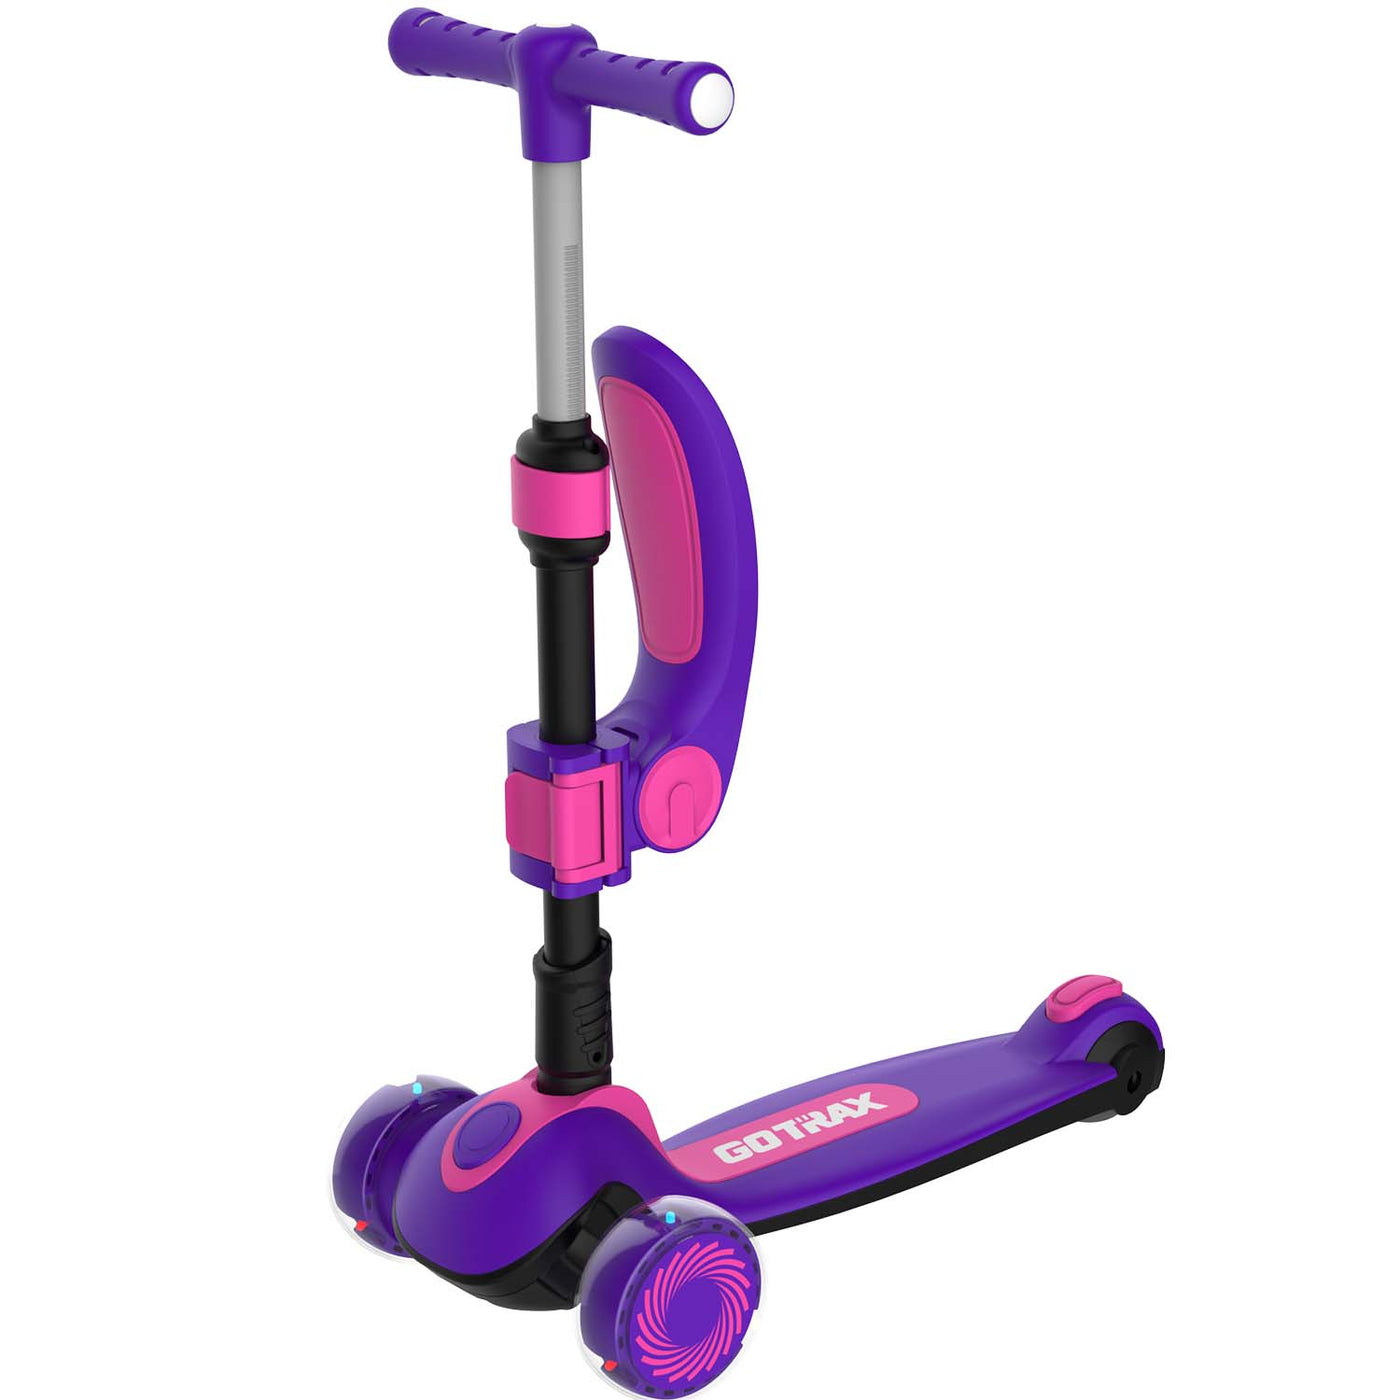 KS2 2-in-1 Sit and Scoot Kick Scooter for Kids - GOTRAX